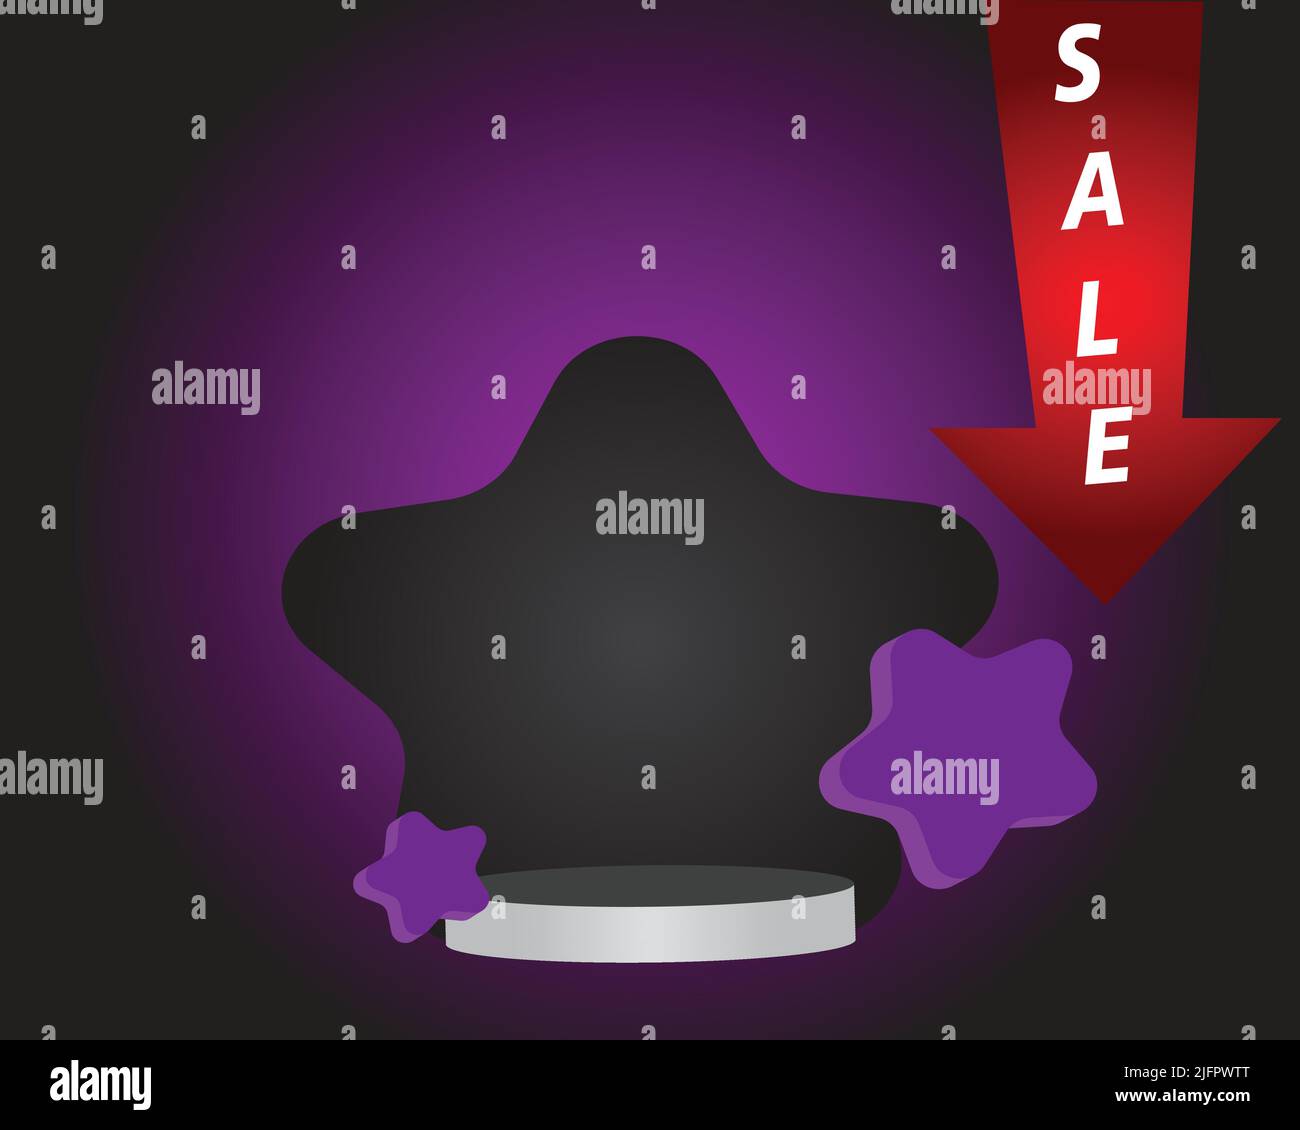 Vector editable template for sales and social media publishing, black background and purple details Stock Vector